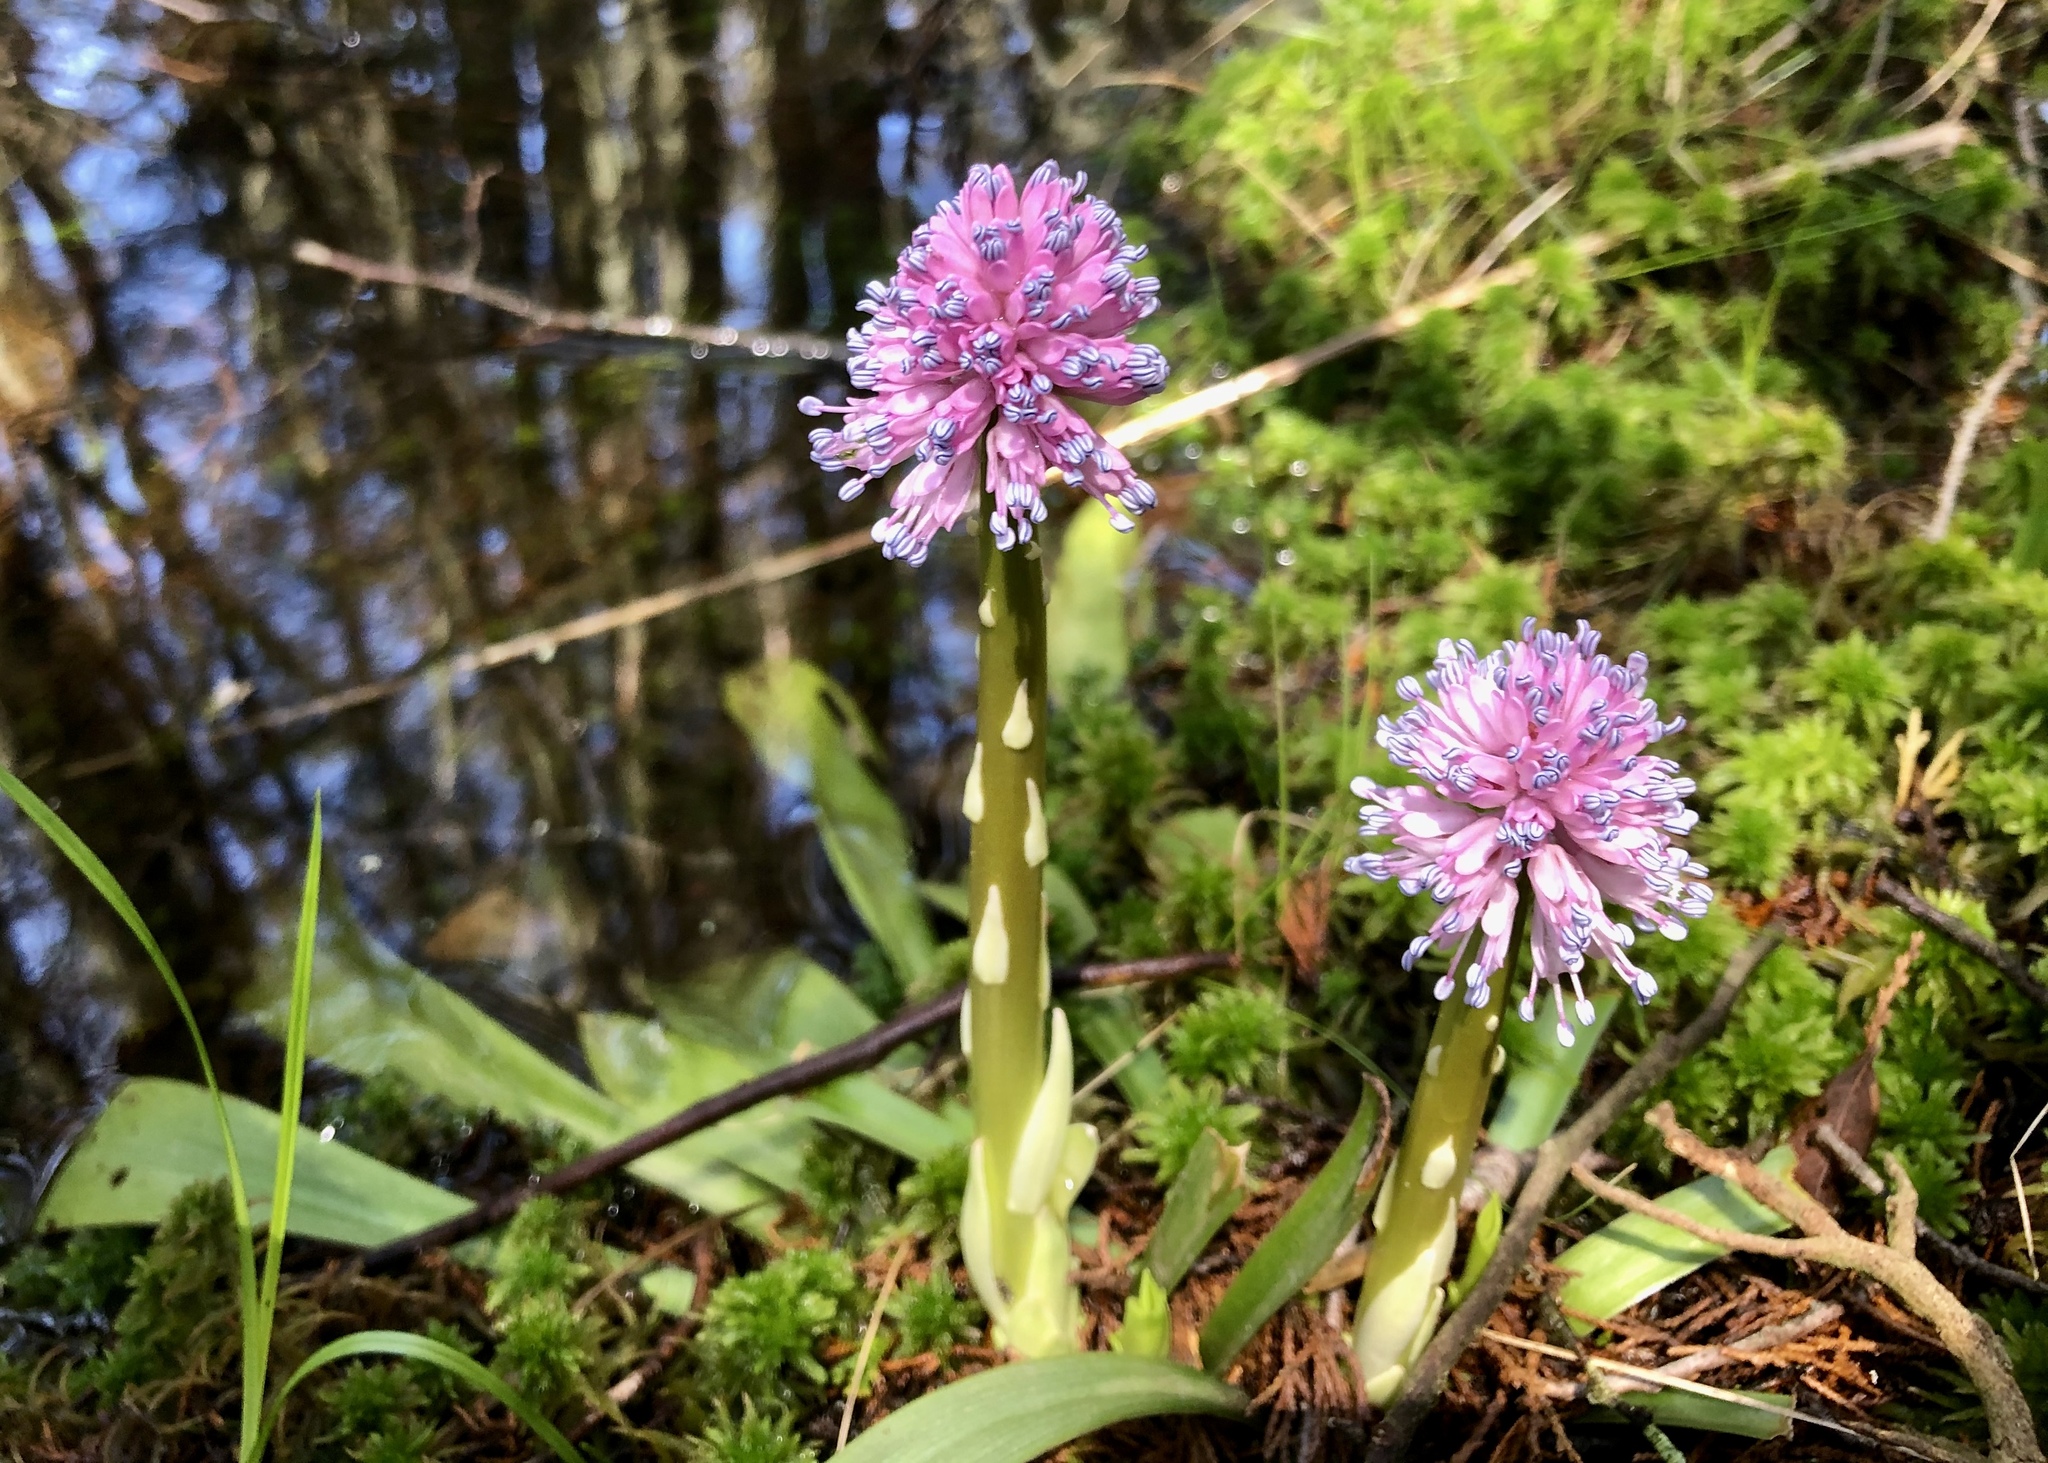 The electric pink flower of Swamp pink (Hellonias bullata) growing on the edge of a stream in an Atlantic white cedar swamp.